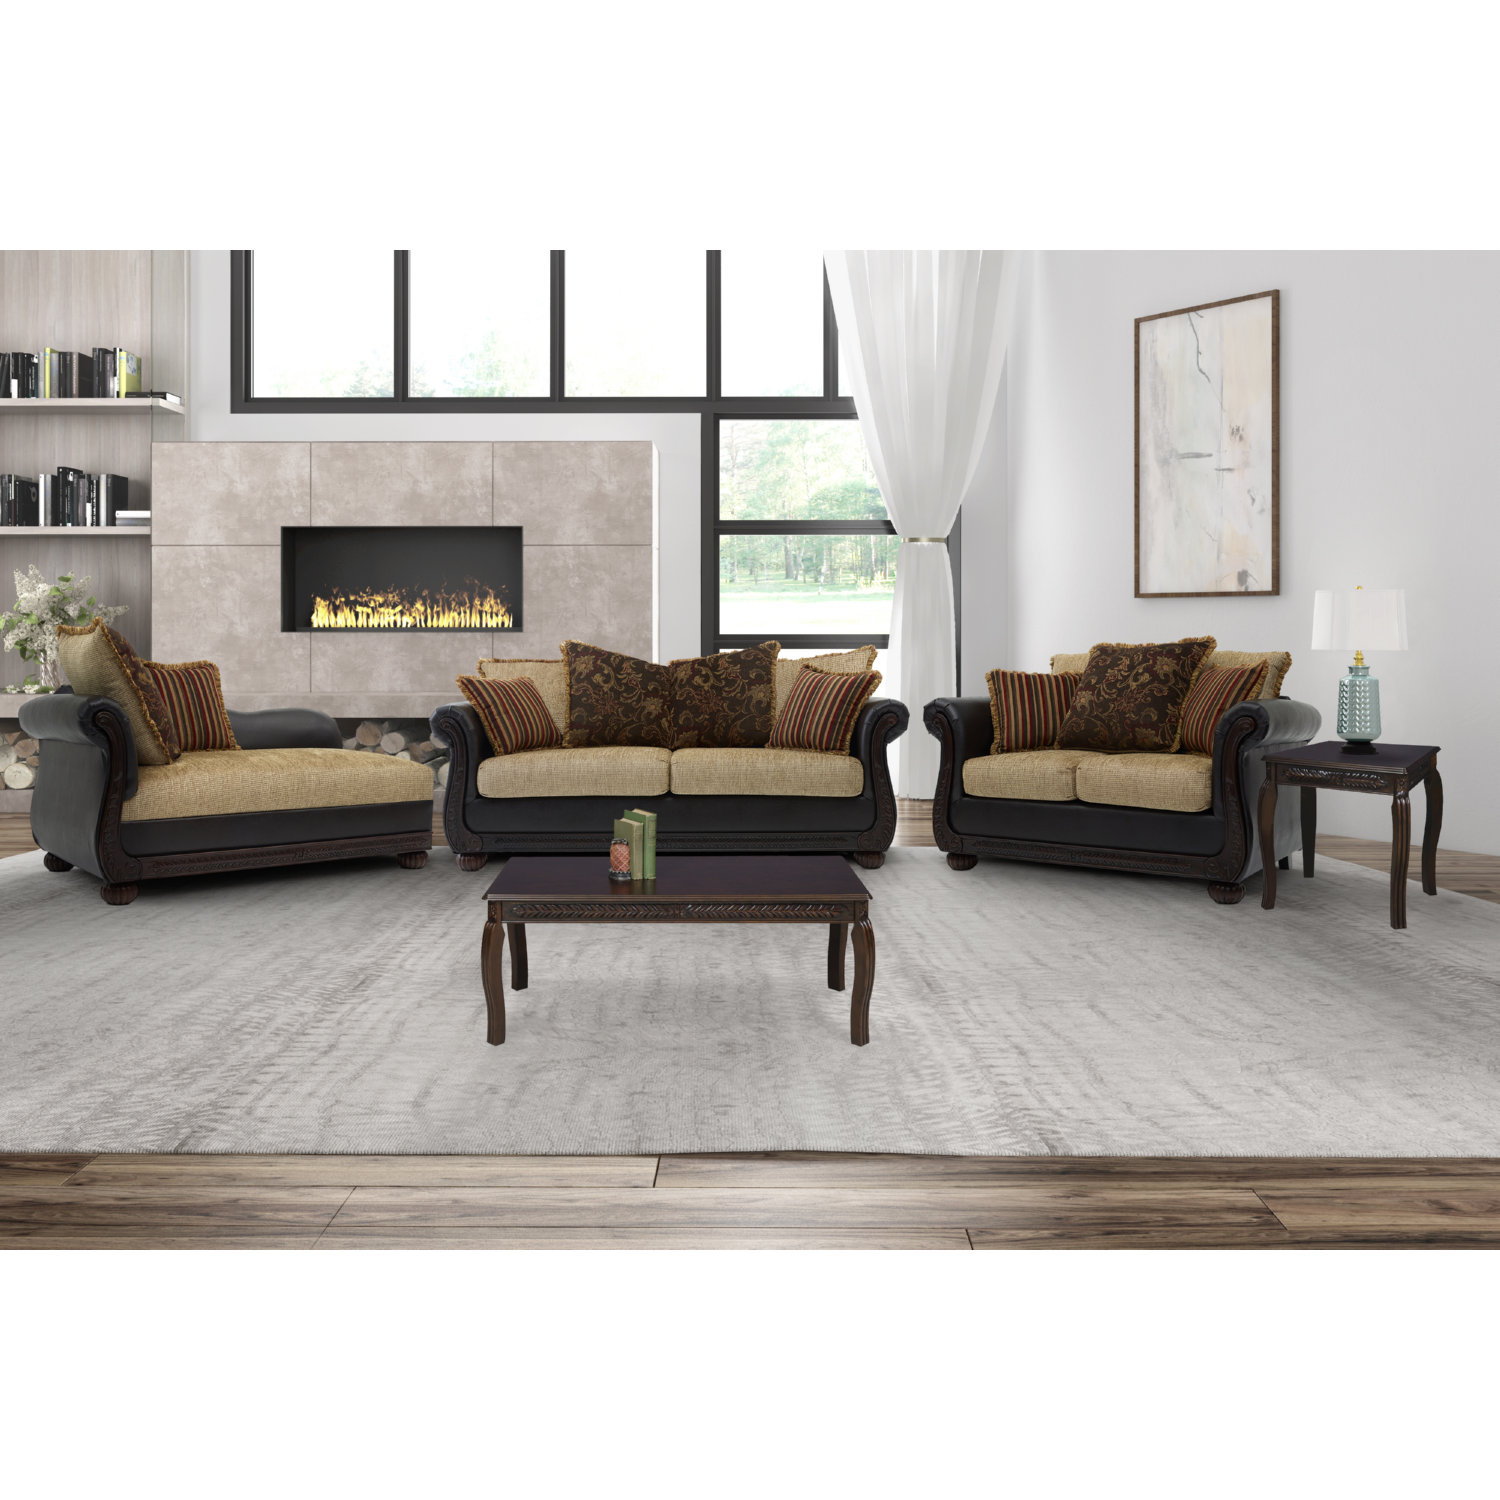 8525 Ruched Arm Sofa Loveseat Chaise Set In Brown Fabric Leatherette By Chintaly Imports